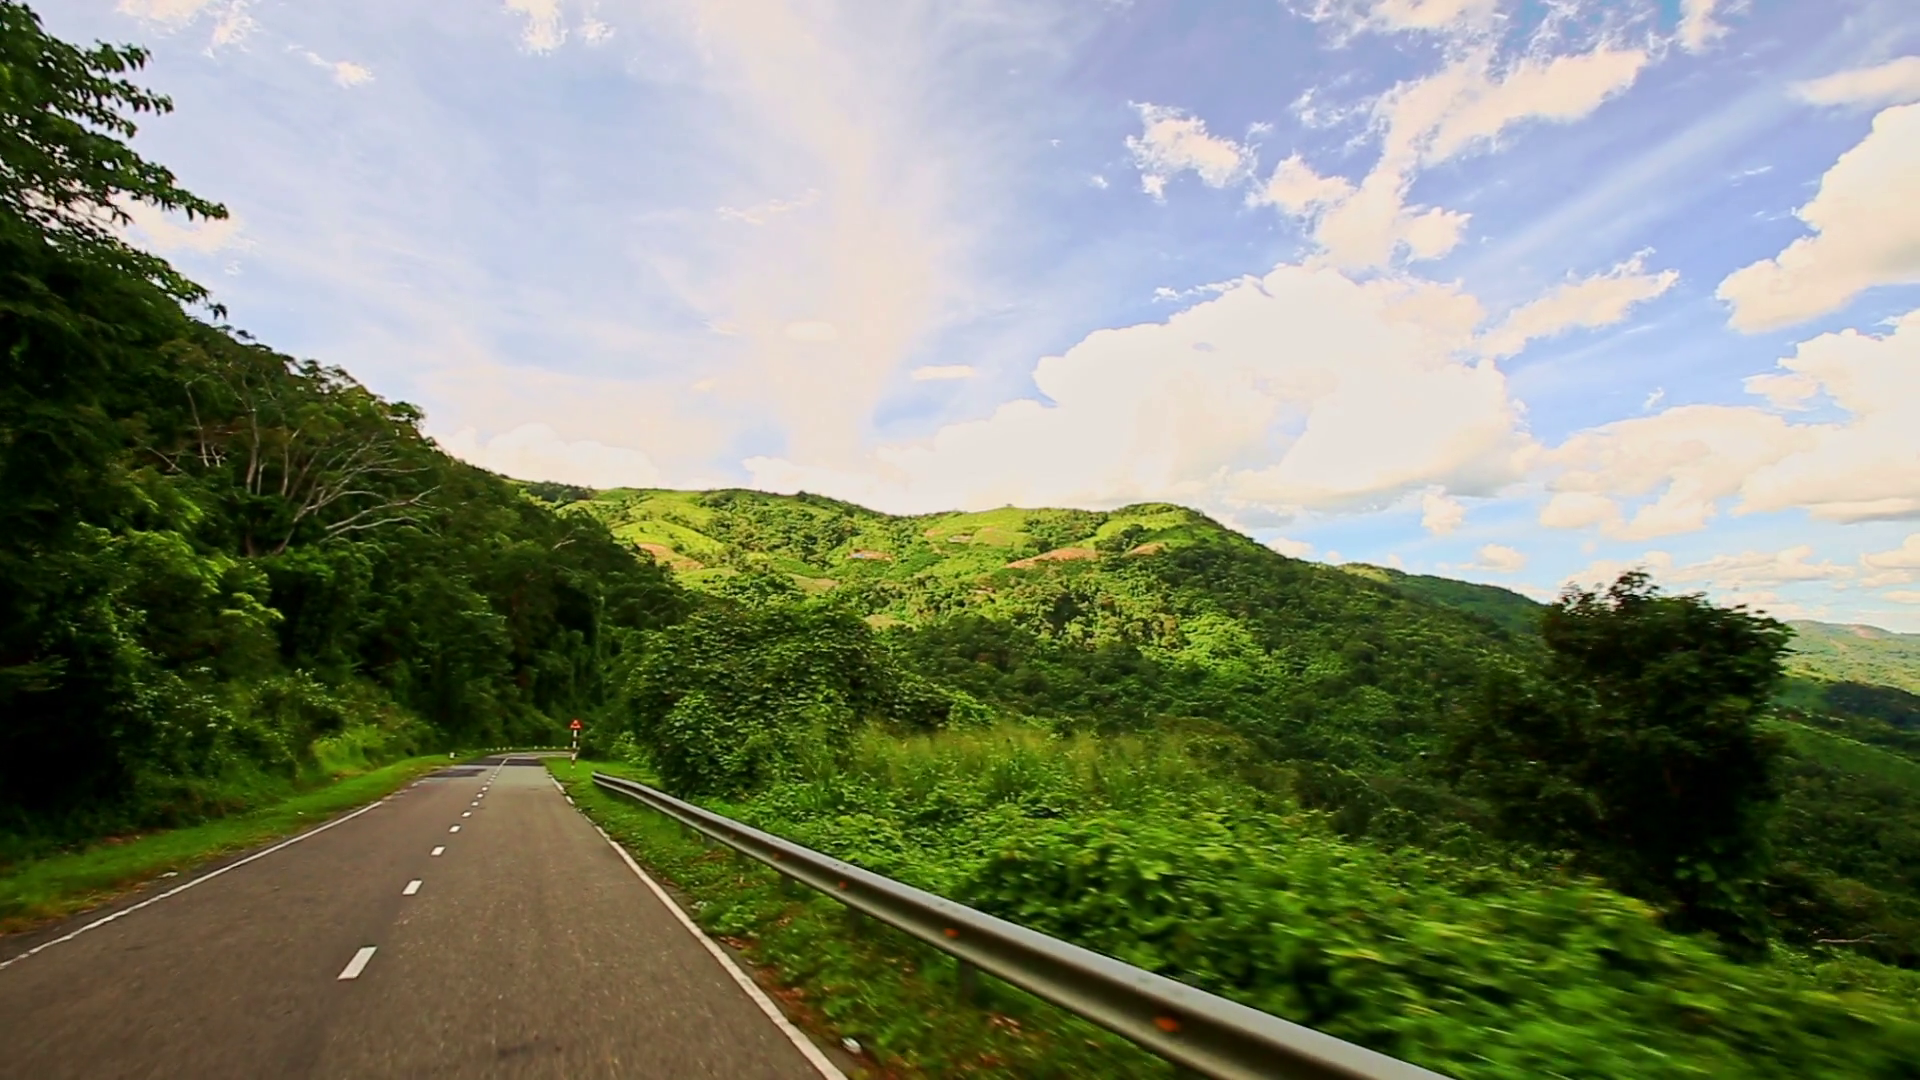 Motion along Country Curvy Road among Hilly Landscape under Sky ...